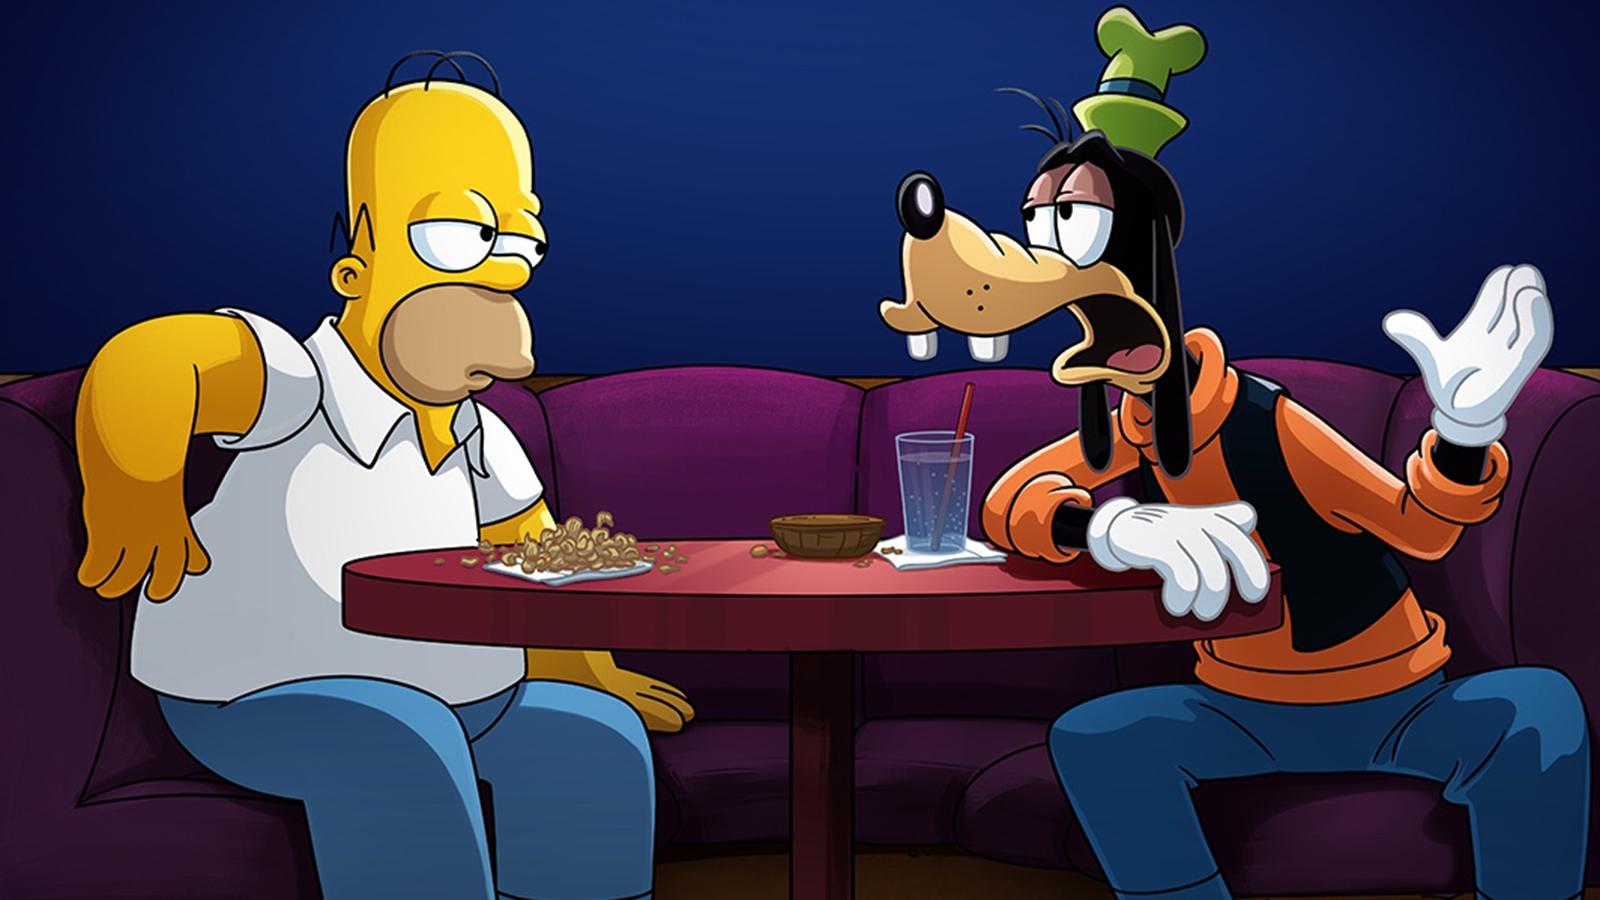 Homer Simpson and Goofy in a special Disney Plus Day episode